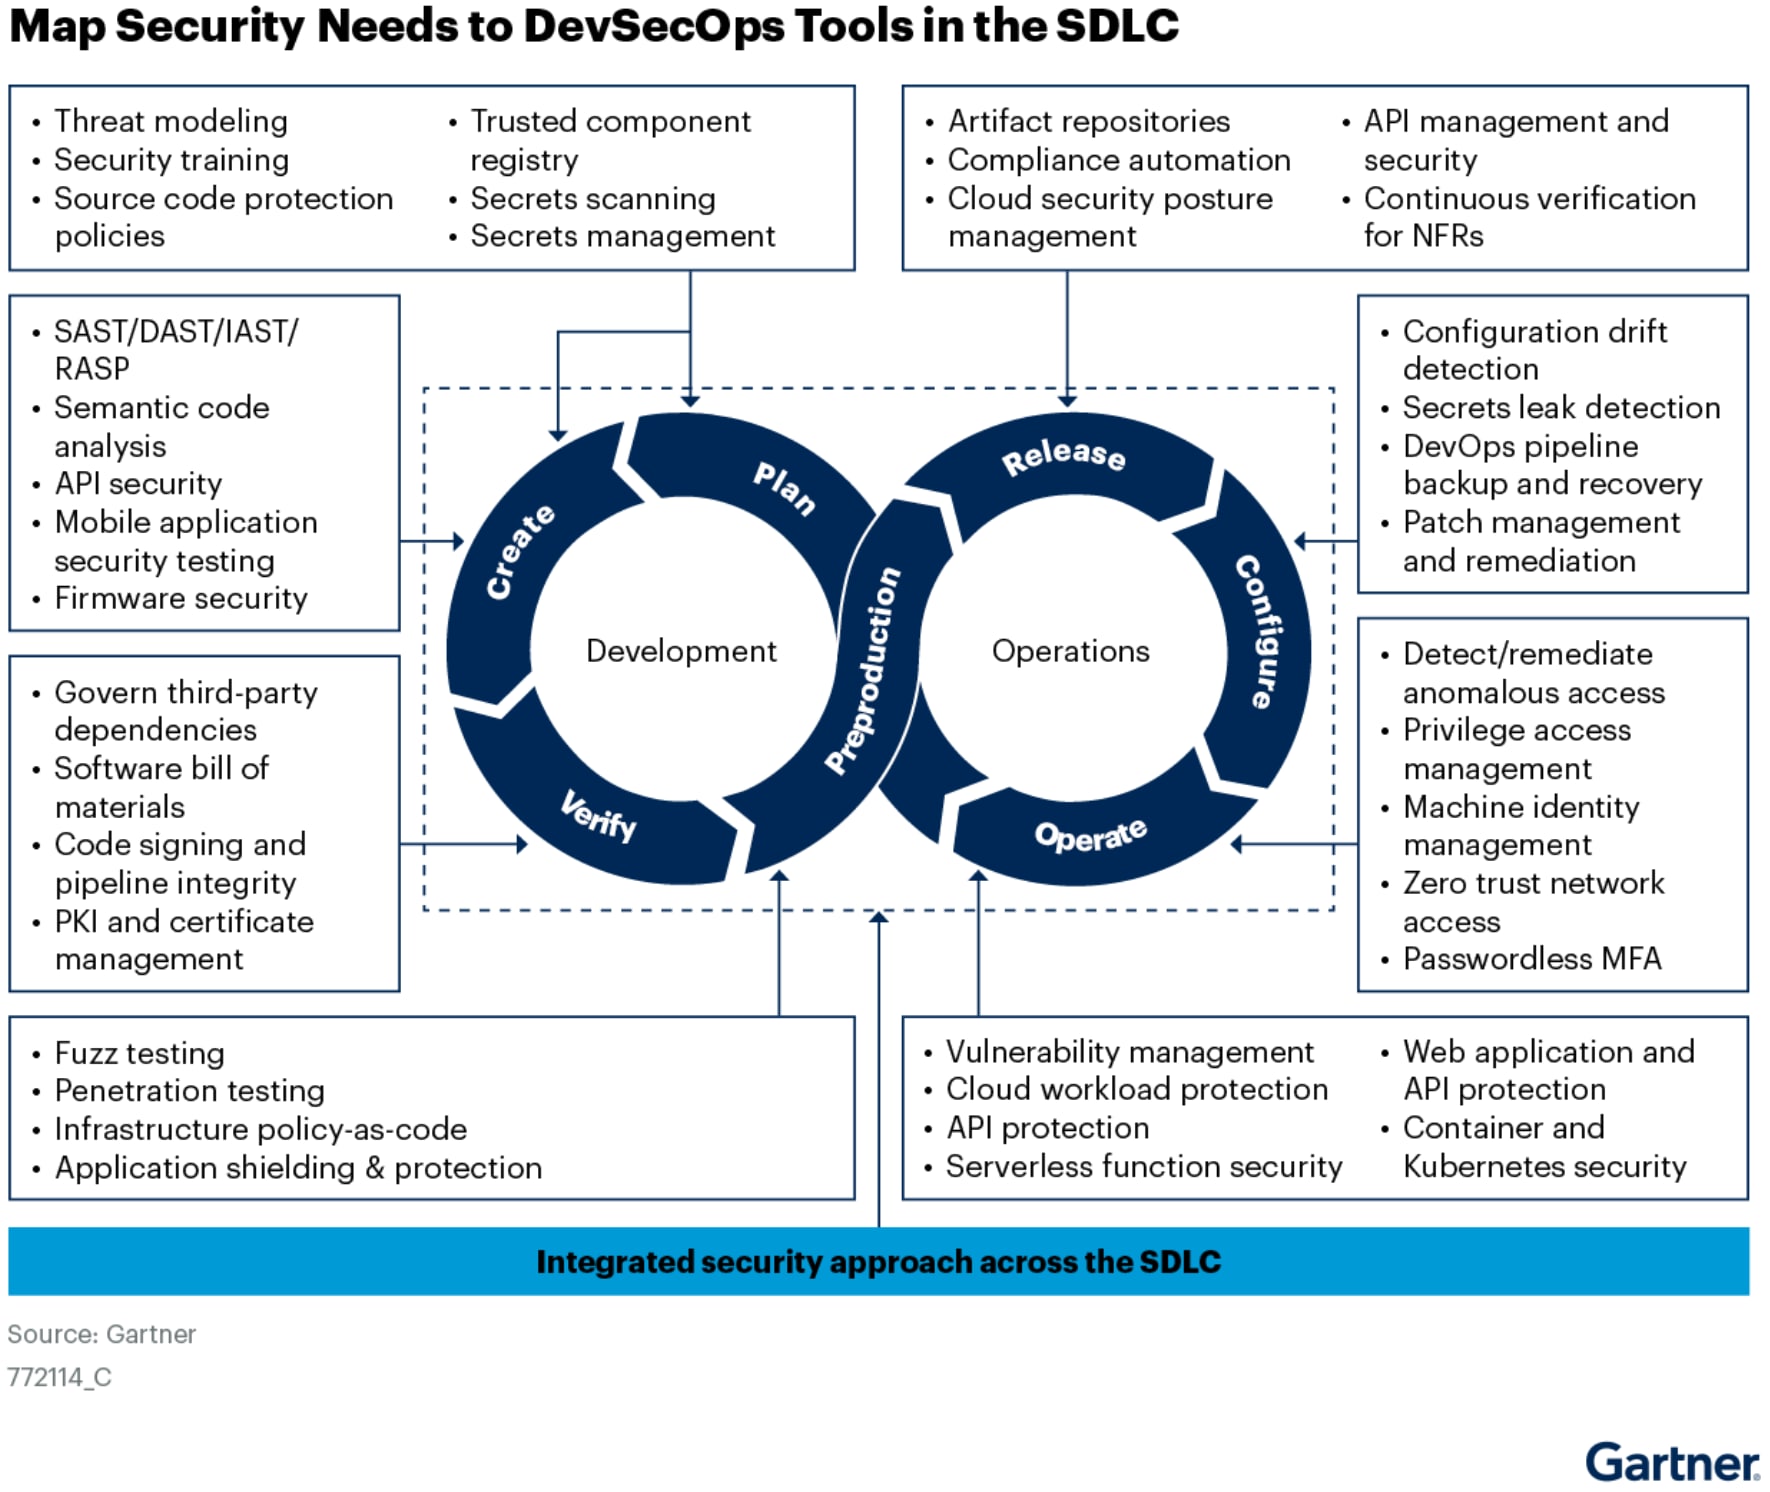 A quick look at the different use cases across the DevSecOps pipeline shows just how many capabilities are needed to maintain security and compliance in today’s agile world.